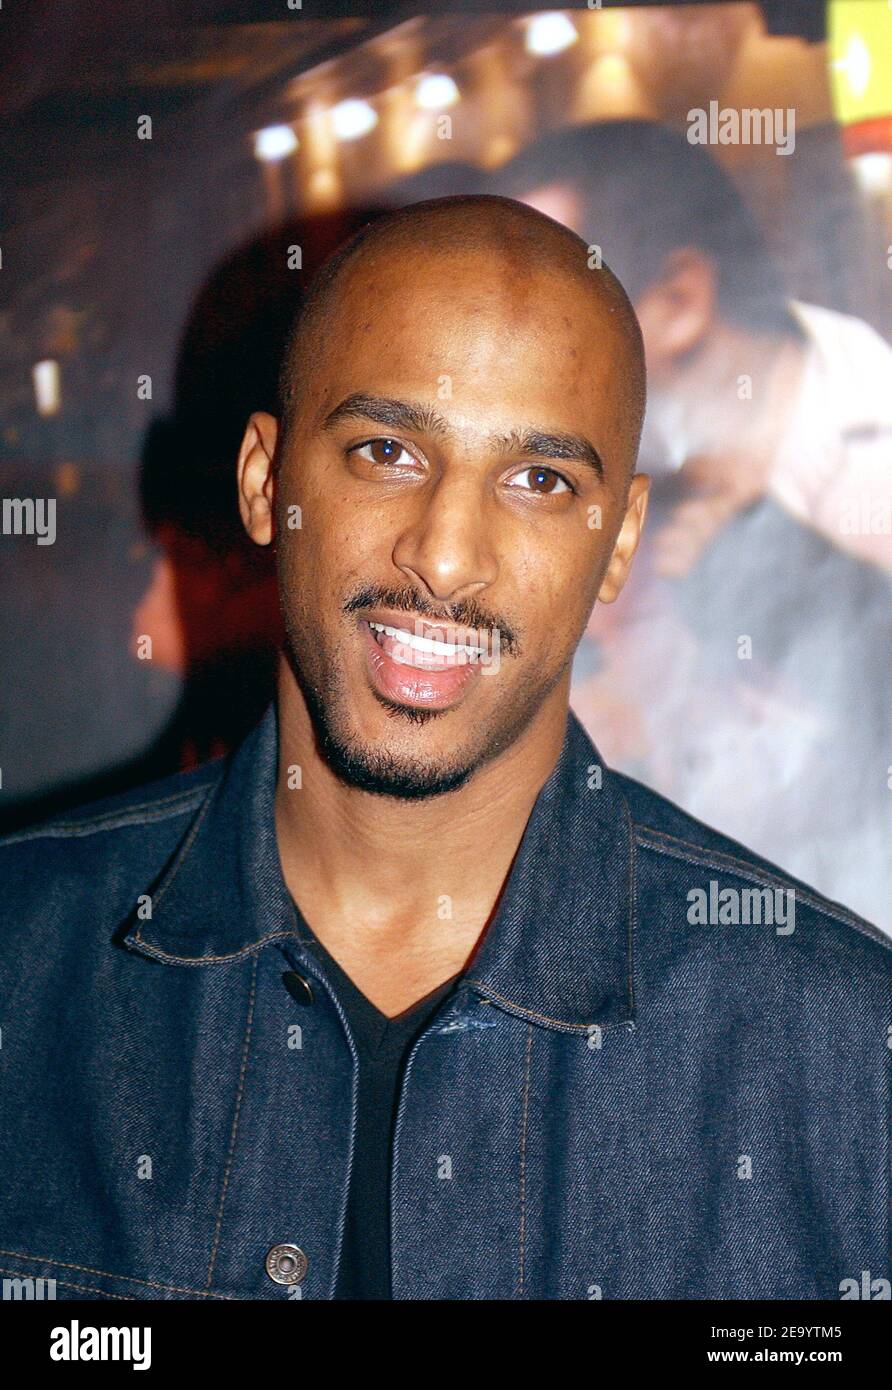 French actor anf rapper Stomy Bugsy attends the premiere of Michel Muller's movie, 'La Vie de Michel Muller est plus belle que la votre', at Pathe Wepler cinema in Paris, France, on January 24, 2005. Photo by Giancarlo Gorassini/ABACA. Stock Photo